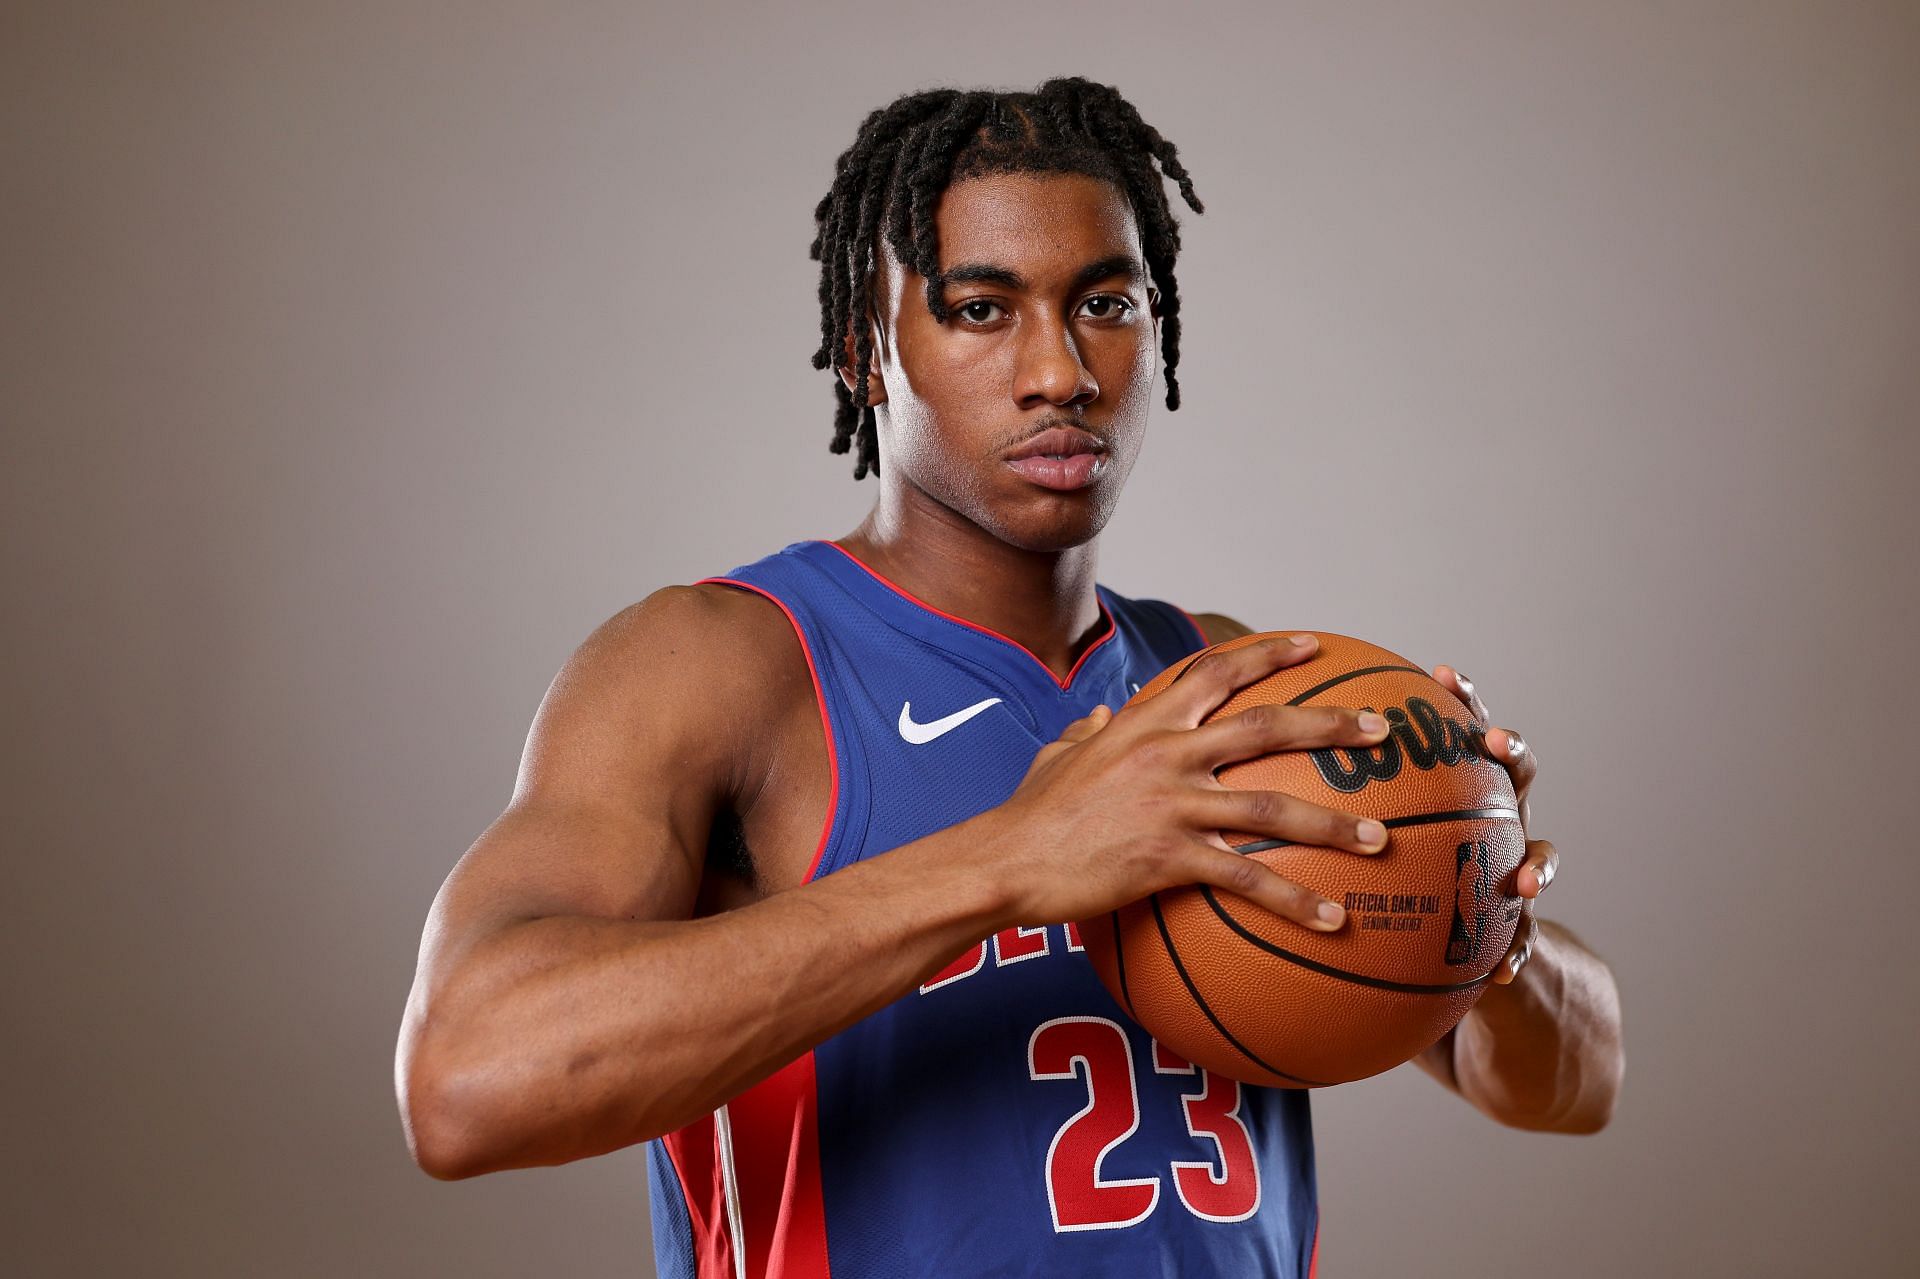 Jaden Ivey at the 2022 NBA Rookie Portraits